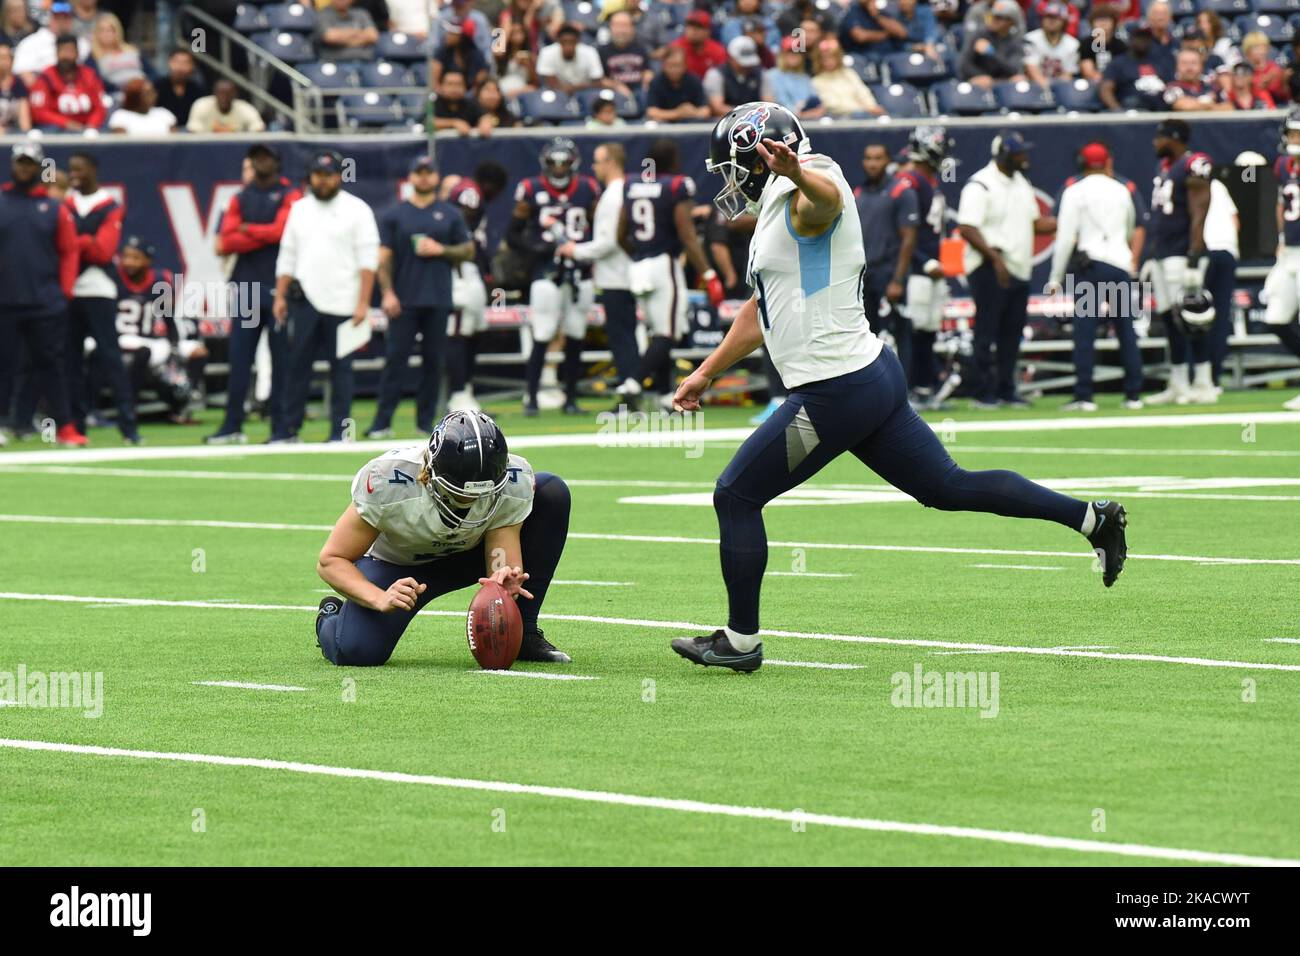 Tennessee Titans place kicker Randy Bullock (14) misses on a 48 yard field goal attempt in the second quarter of the NFL Football Game between the Ten Stock Photo